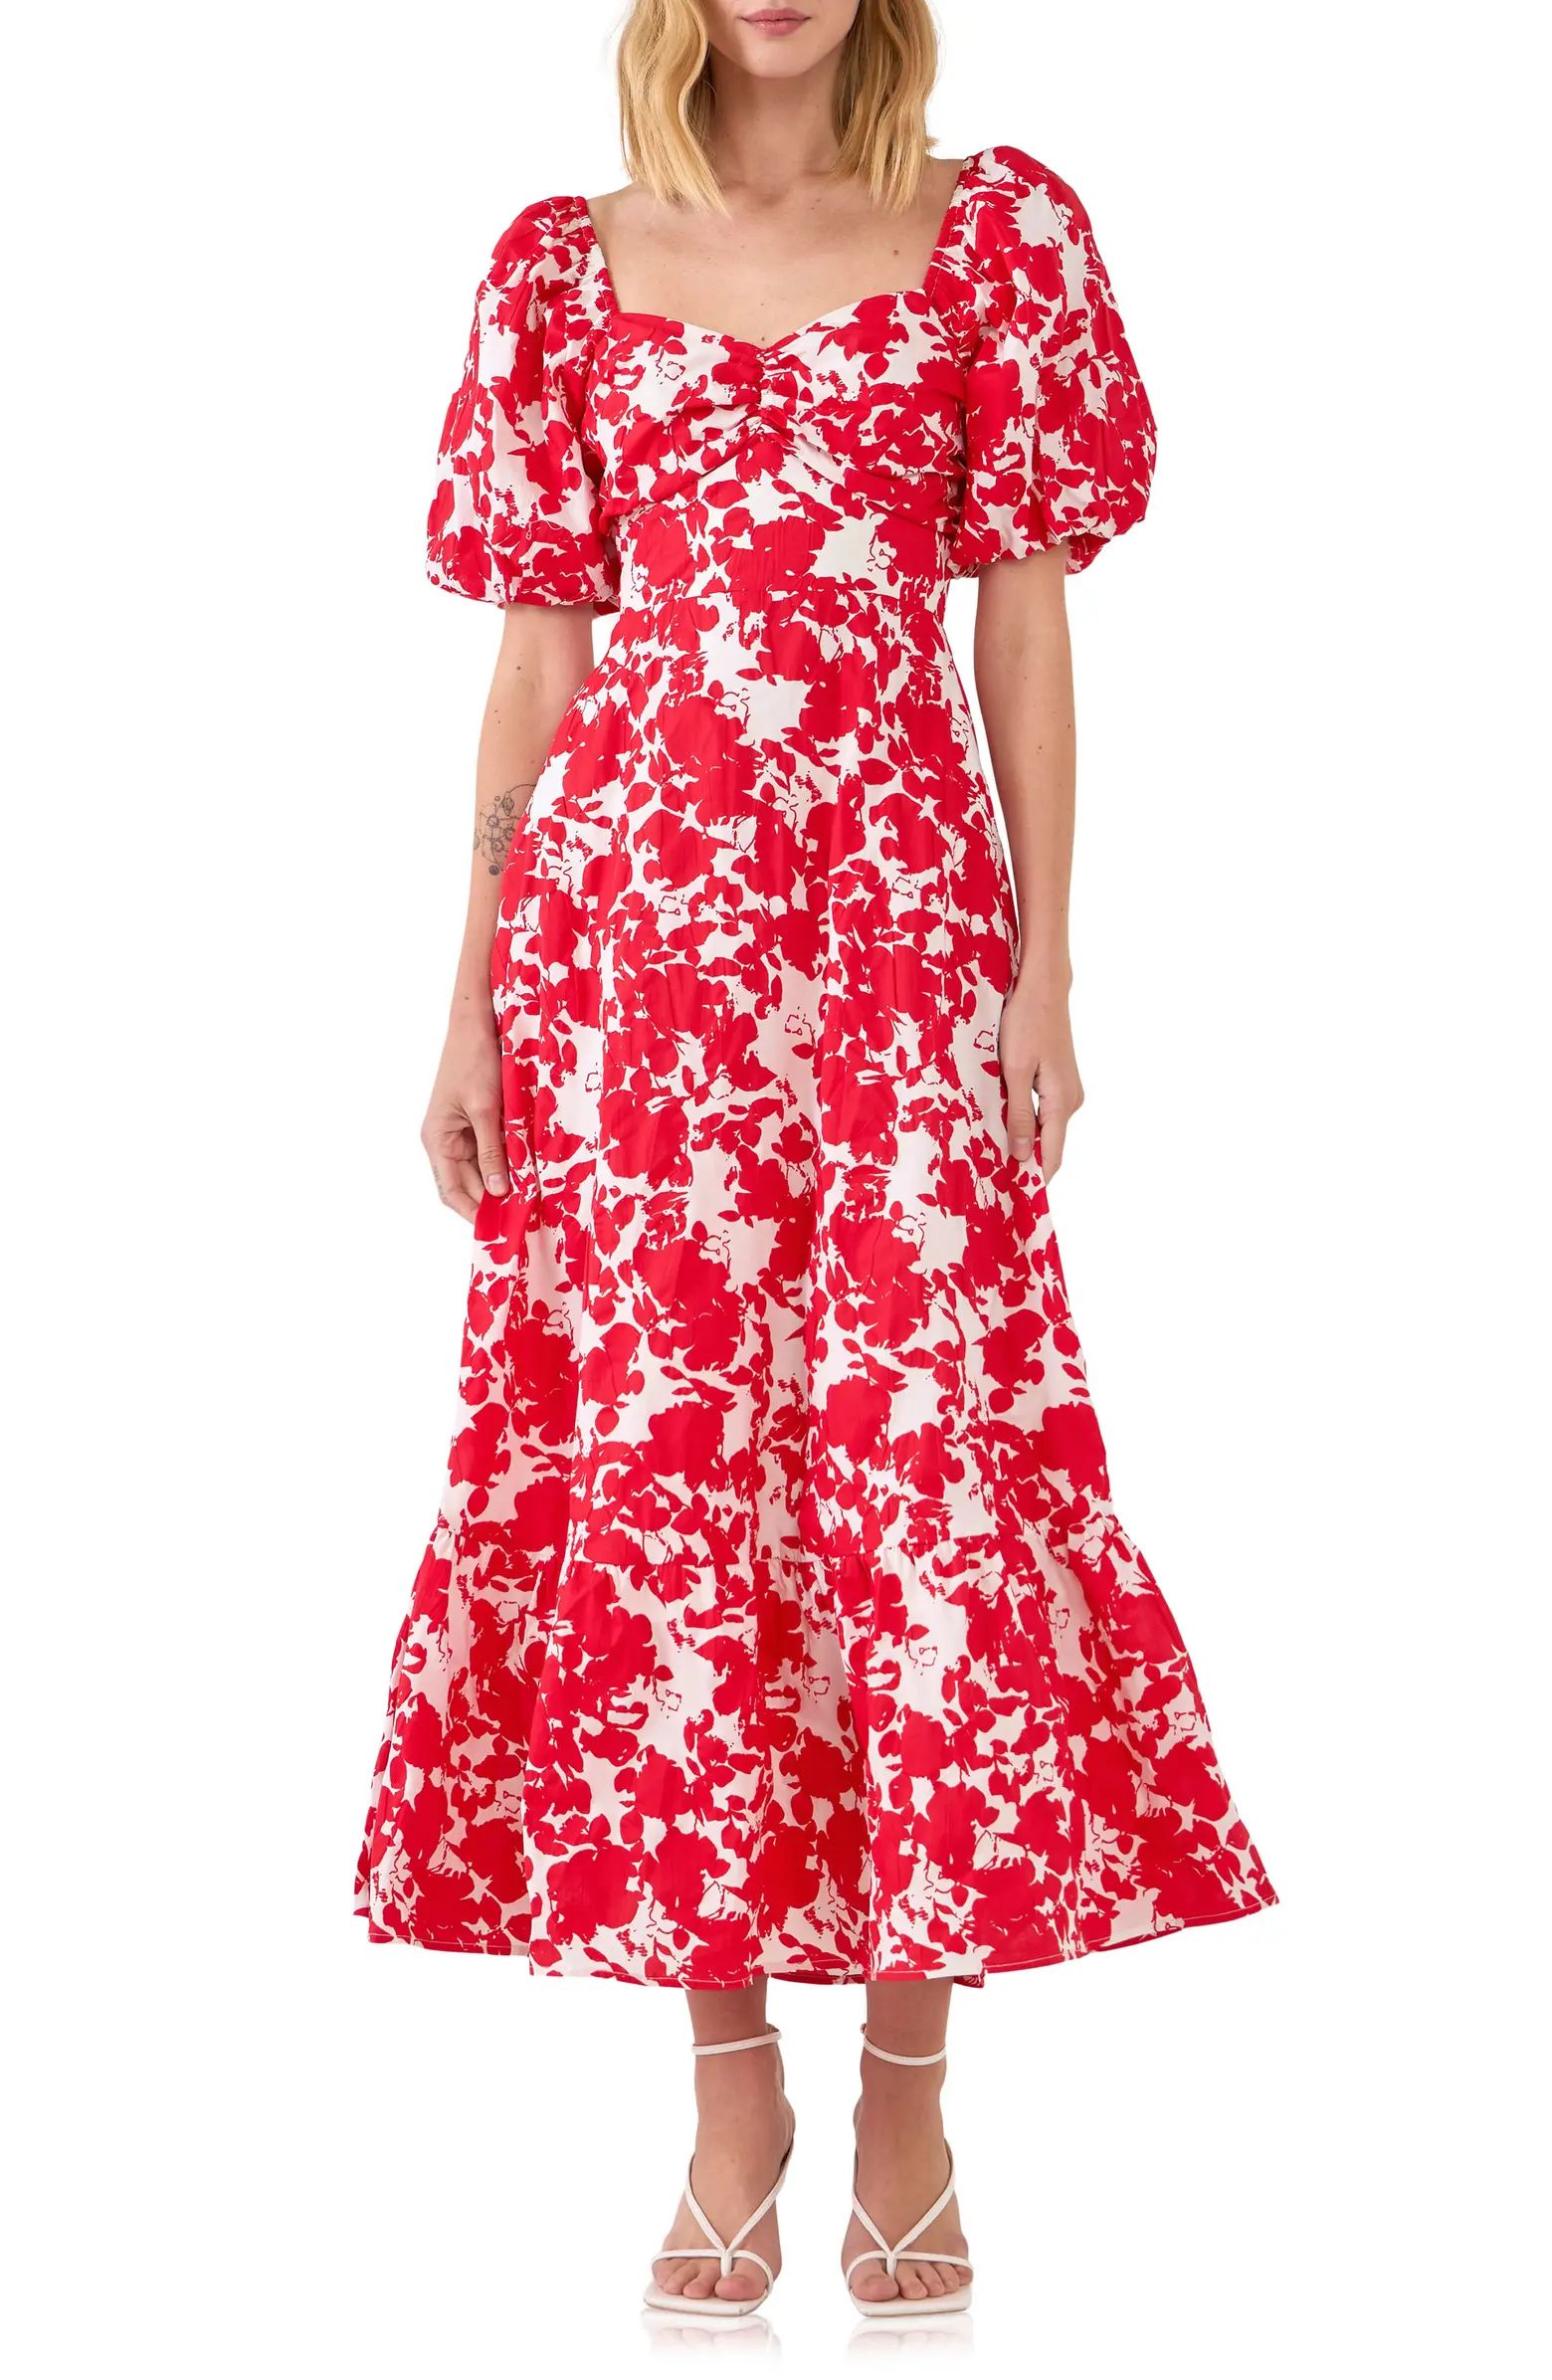 Free the Roses Floral Print Cotton Maxi Dress | Nordstrom | Nordstrom